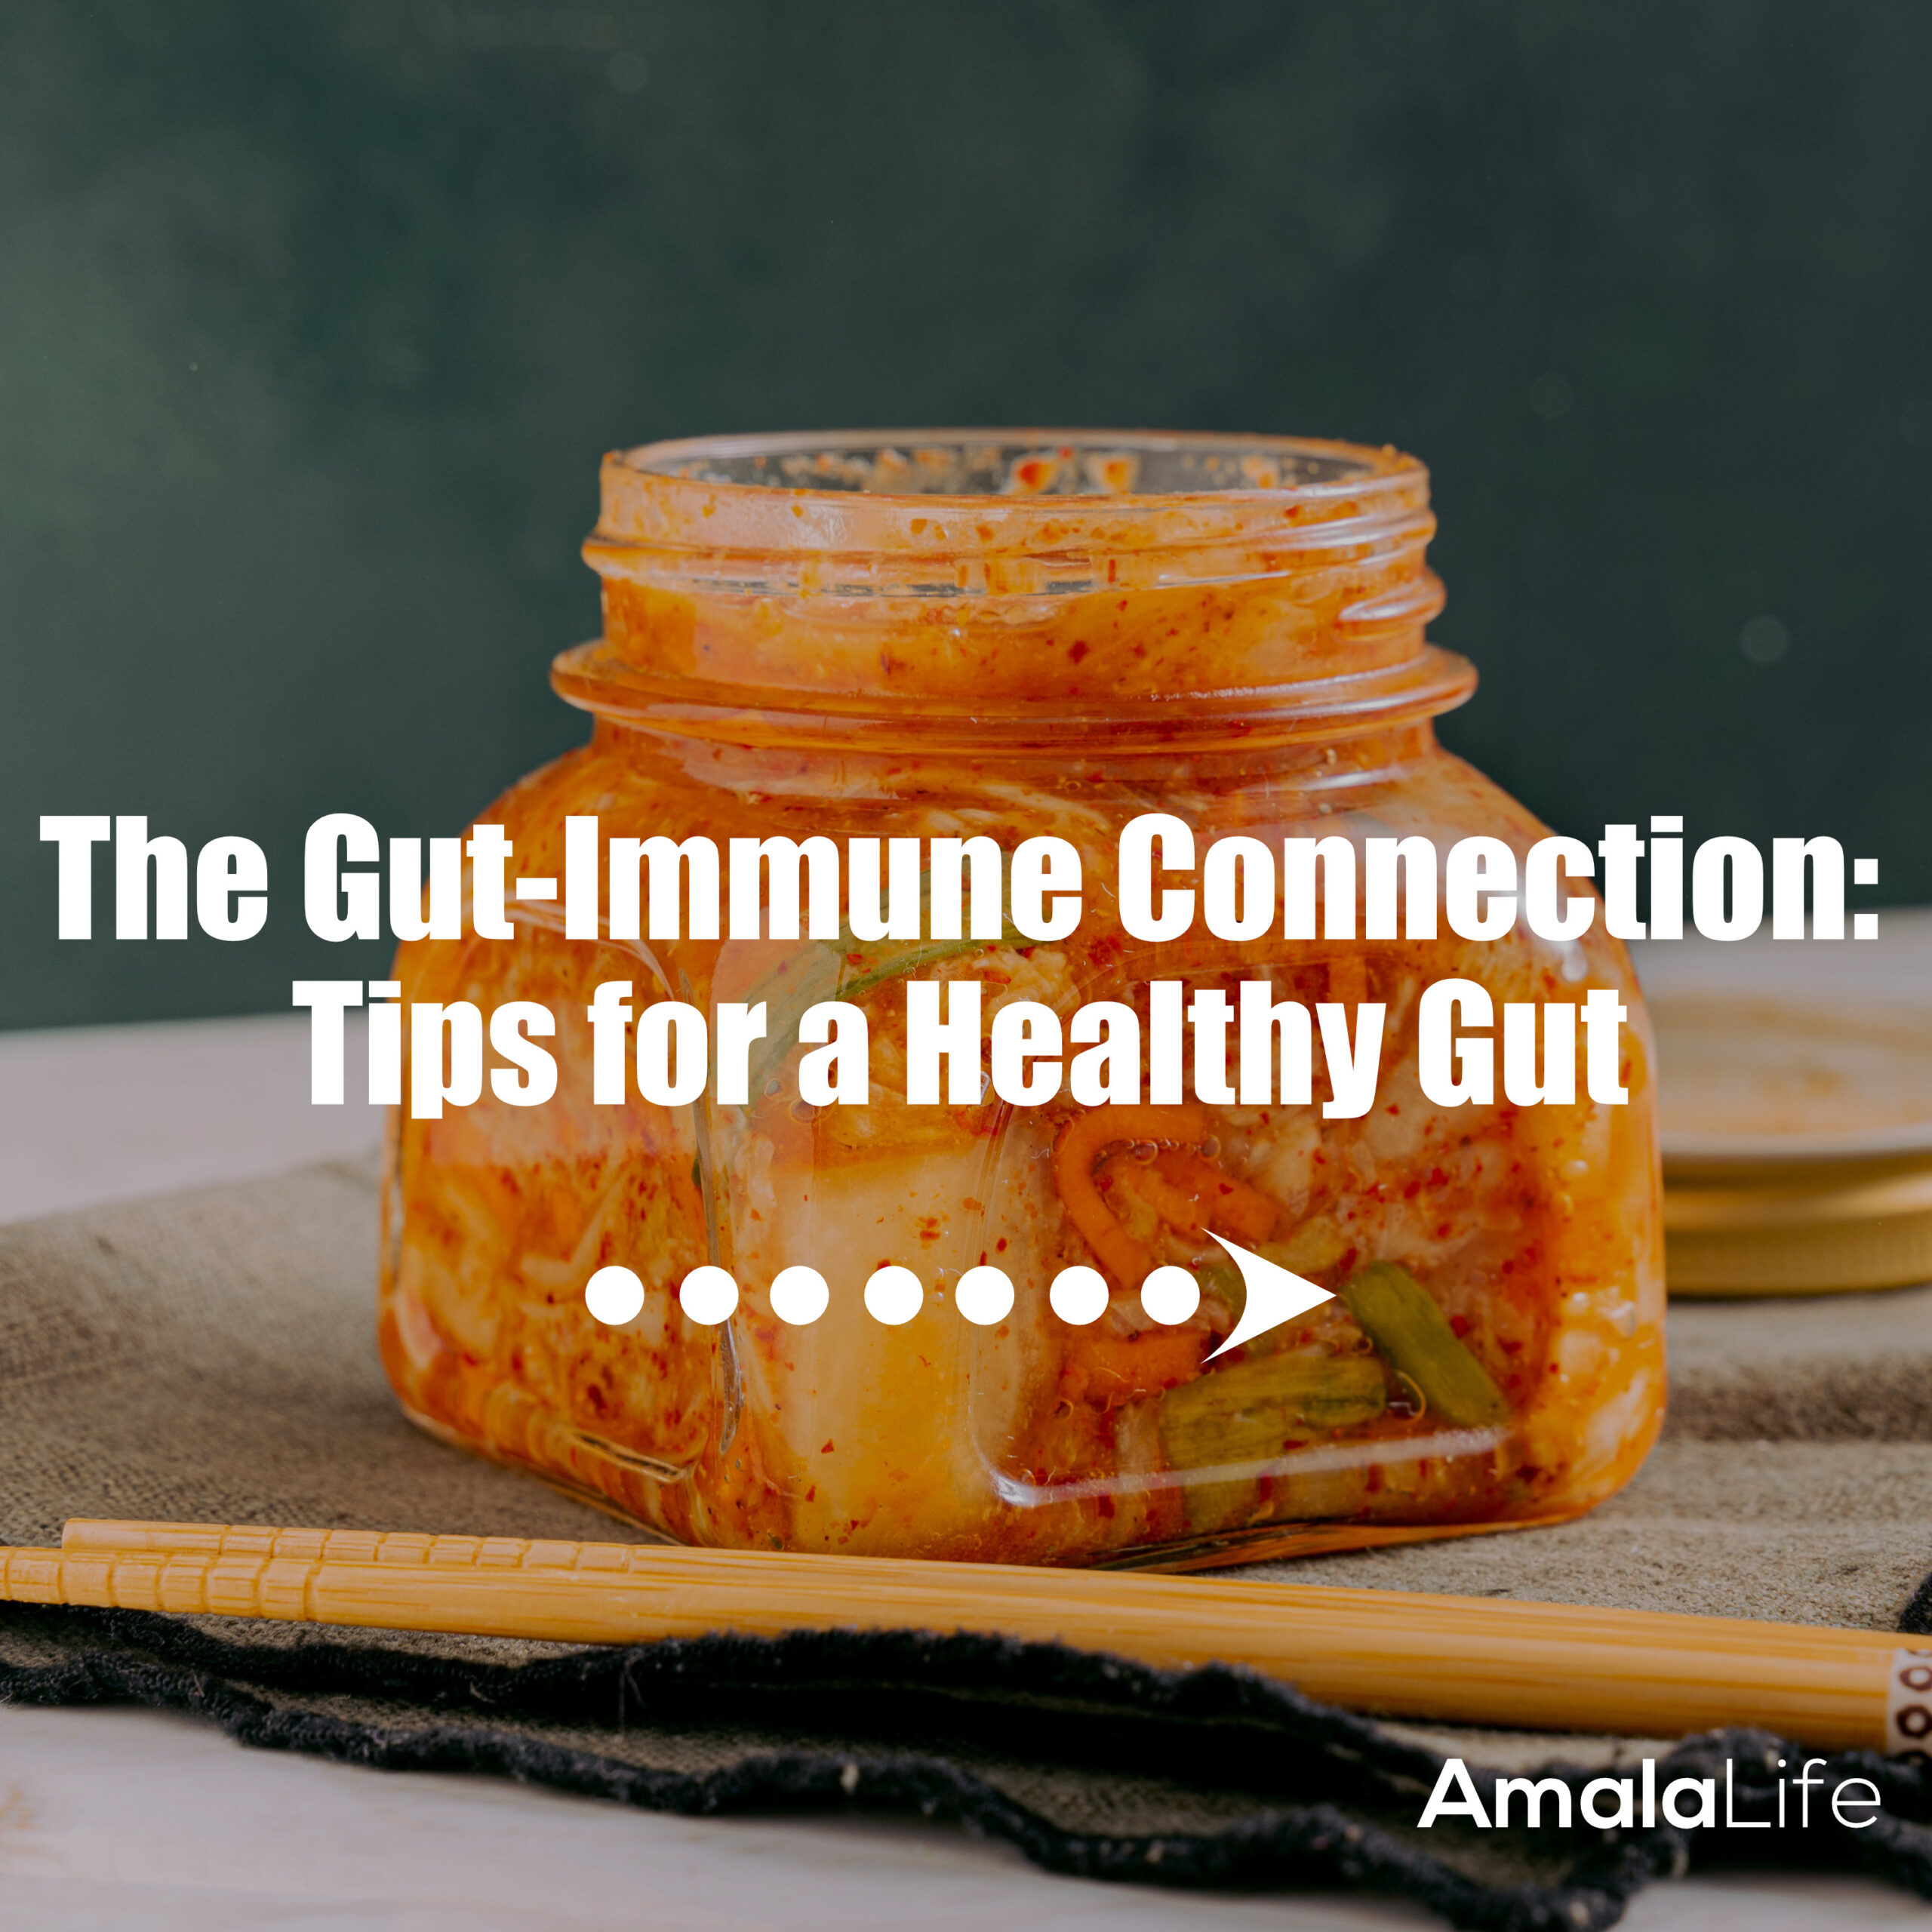 The Gut-Immune Connection: Tips for a Healthy Gut